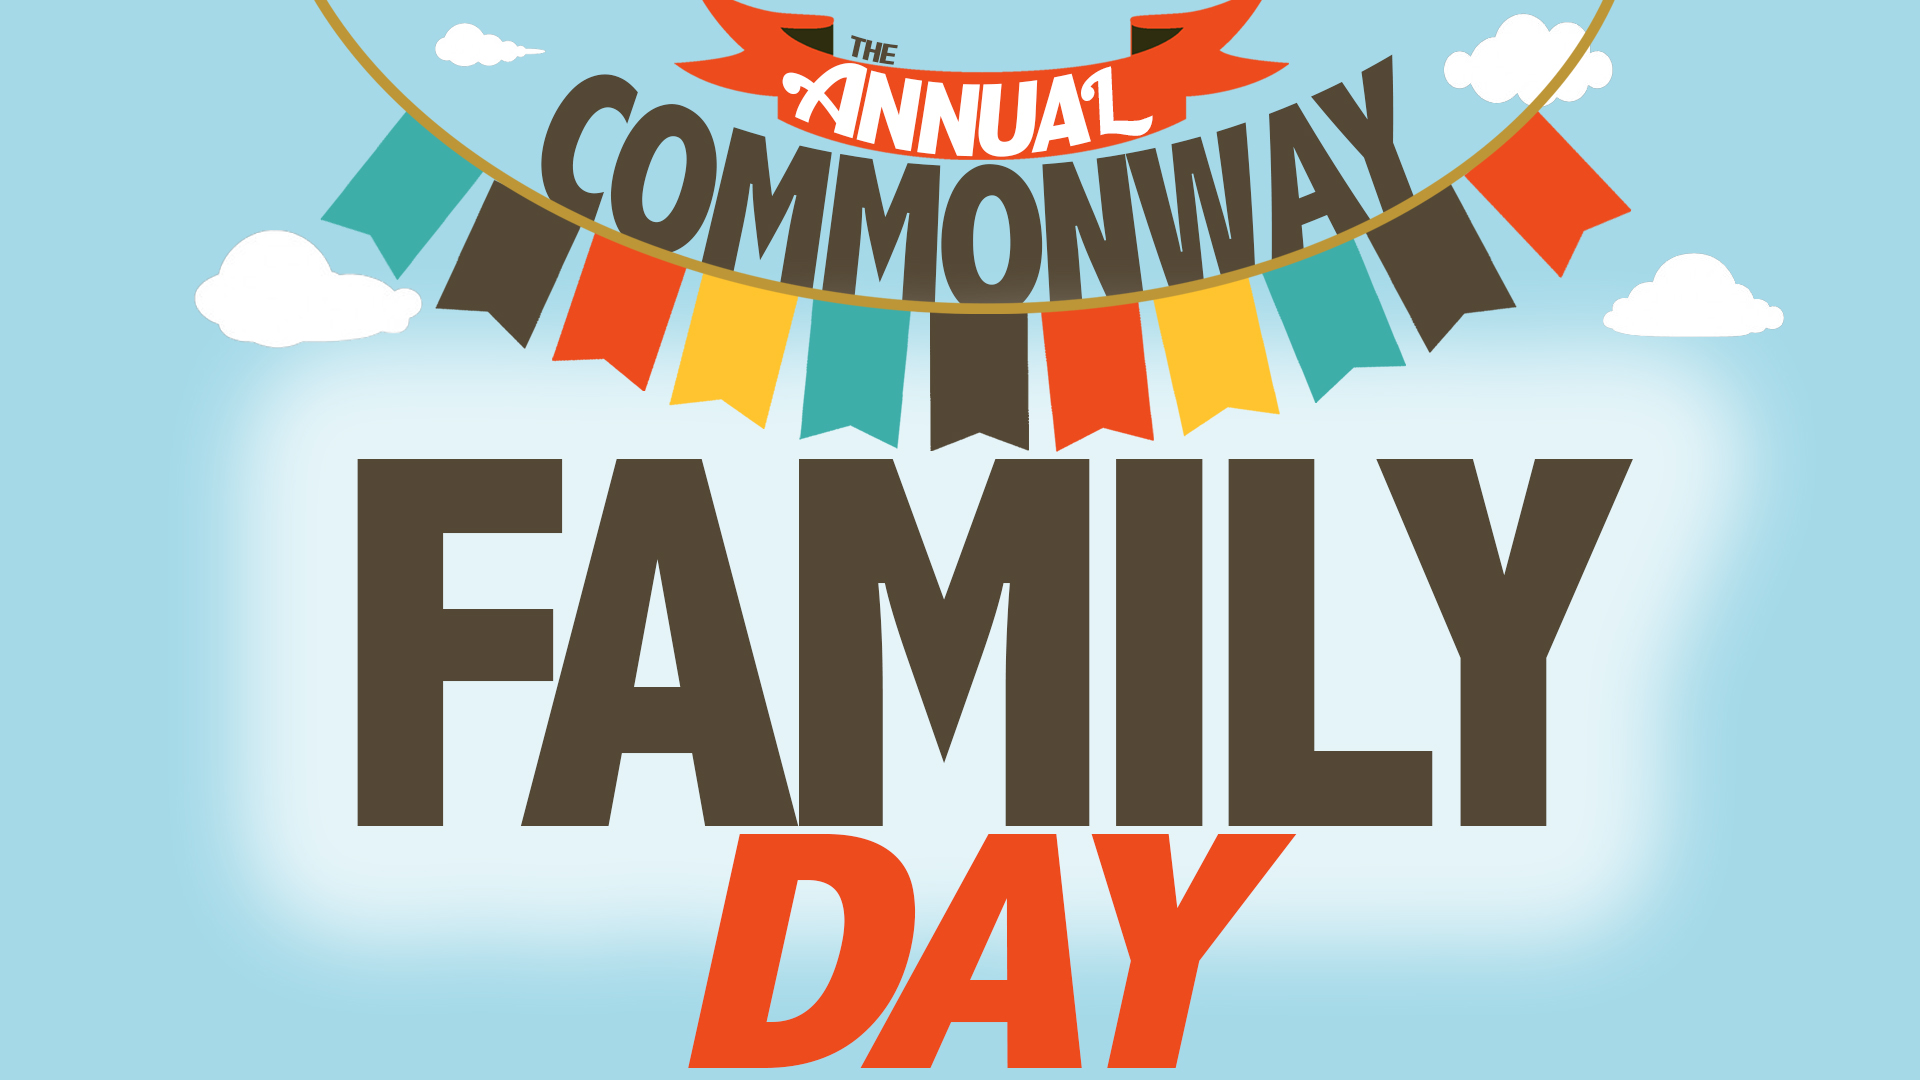 Family Day 2016 – Commonway Church